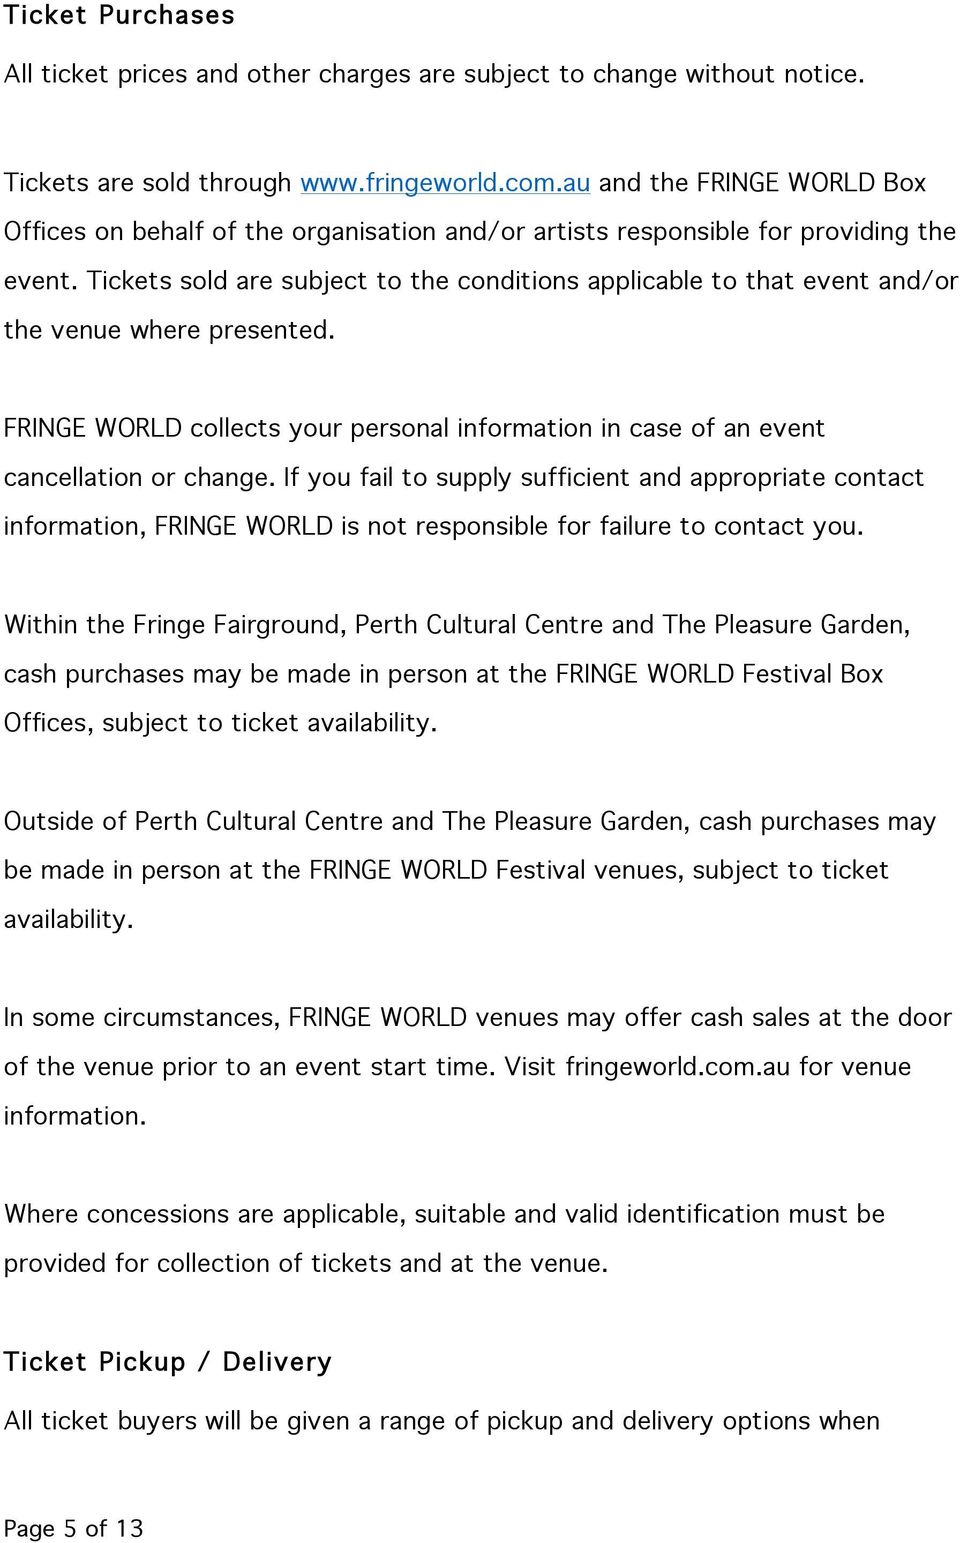 Tickets sold are subject to the conditions applicable to that event and/or the venue where presented. FRINGE WORLD collects your personal information in case of an event cancellation or change.